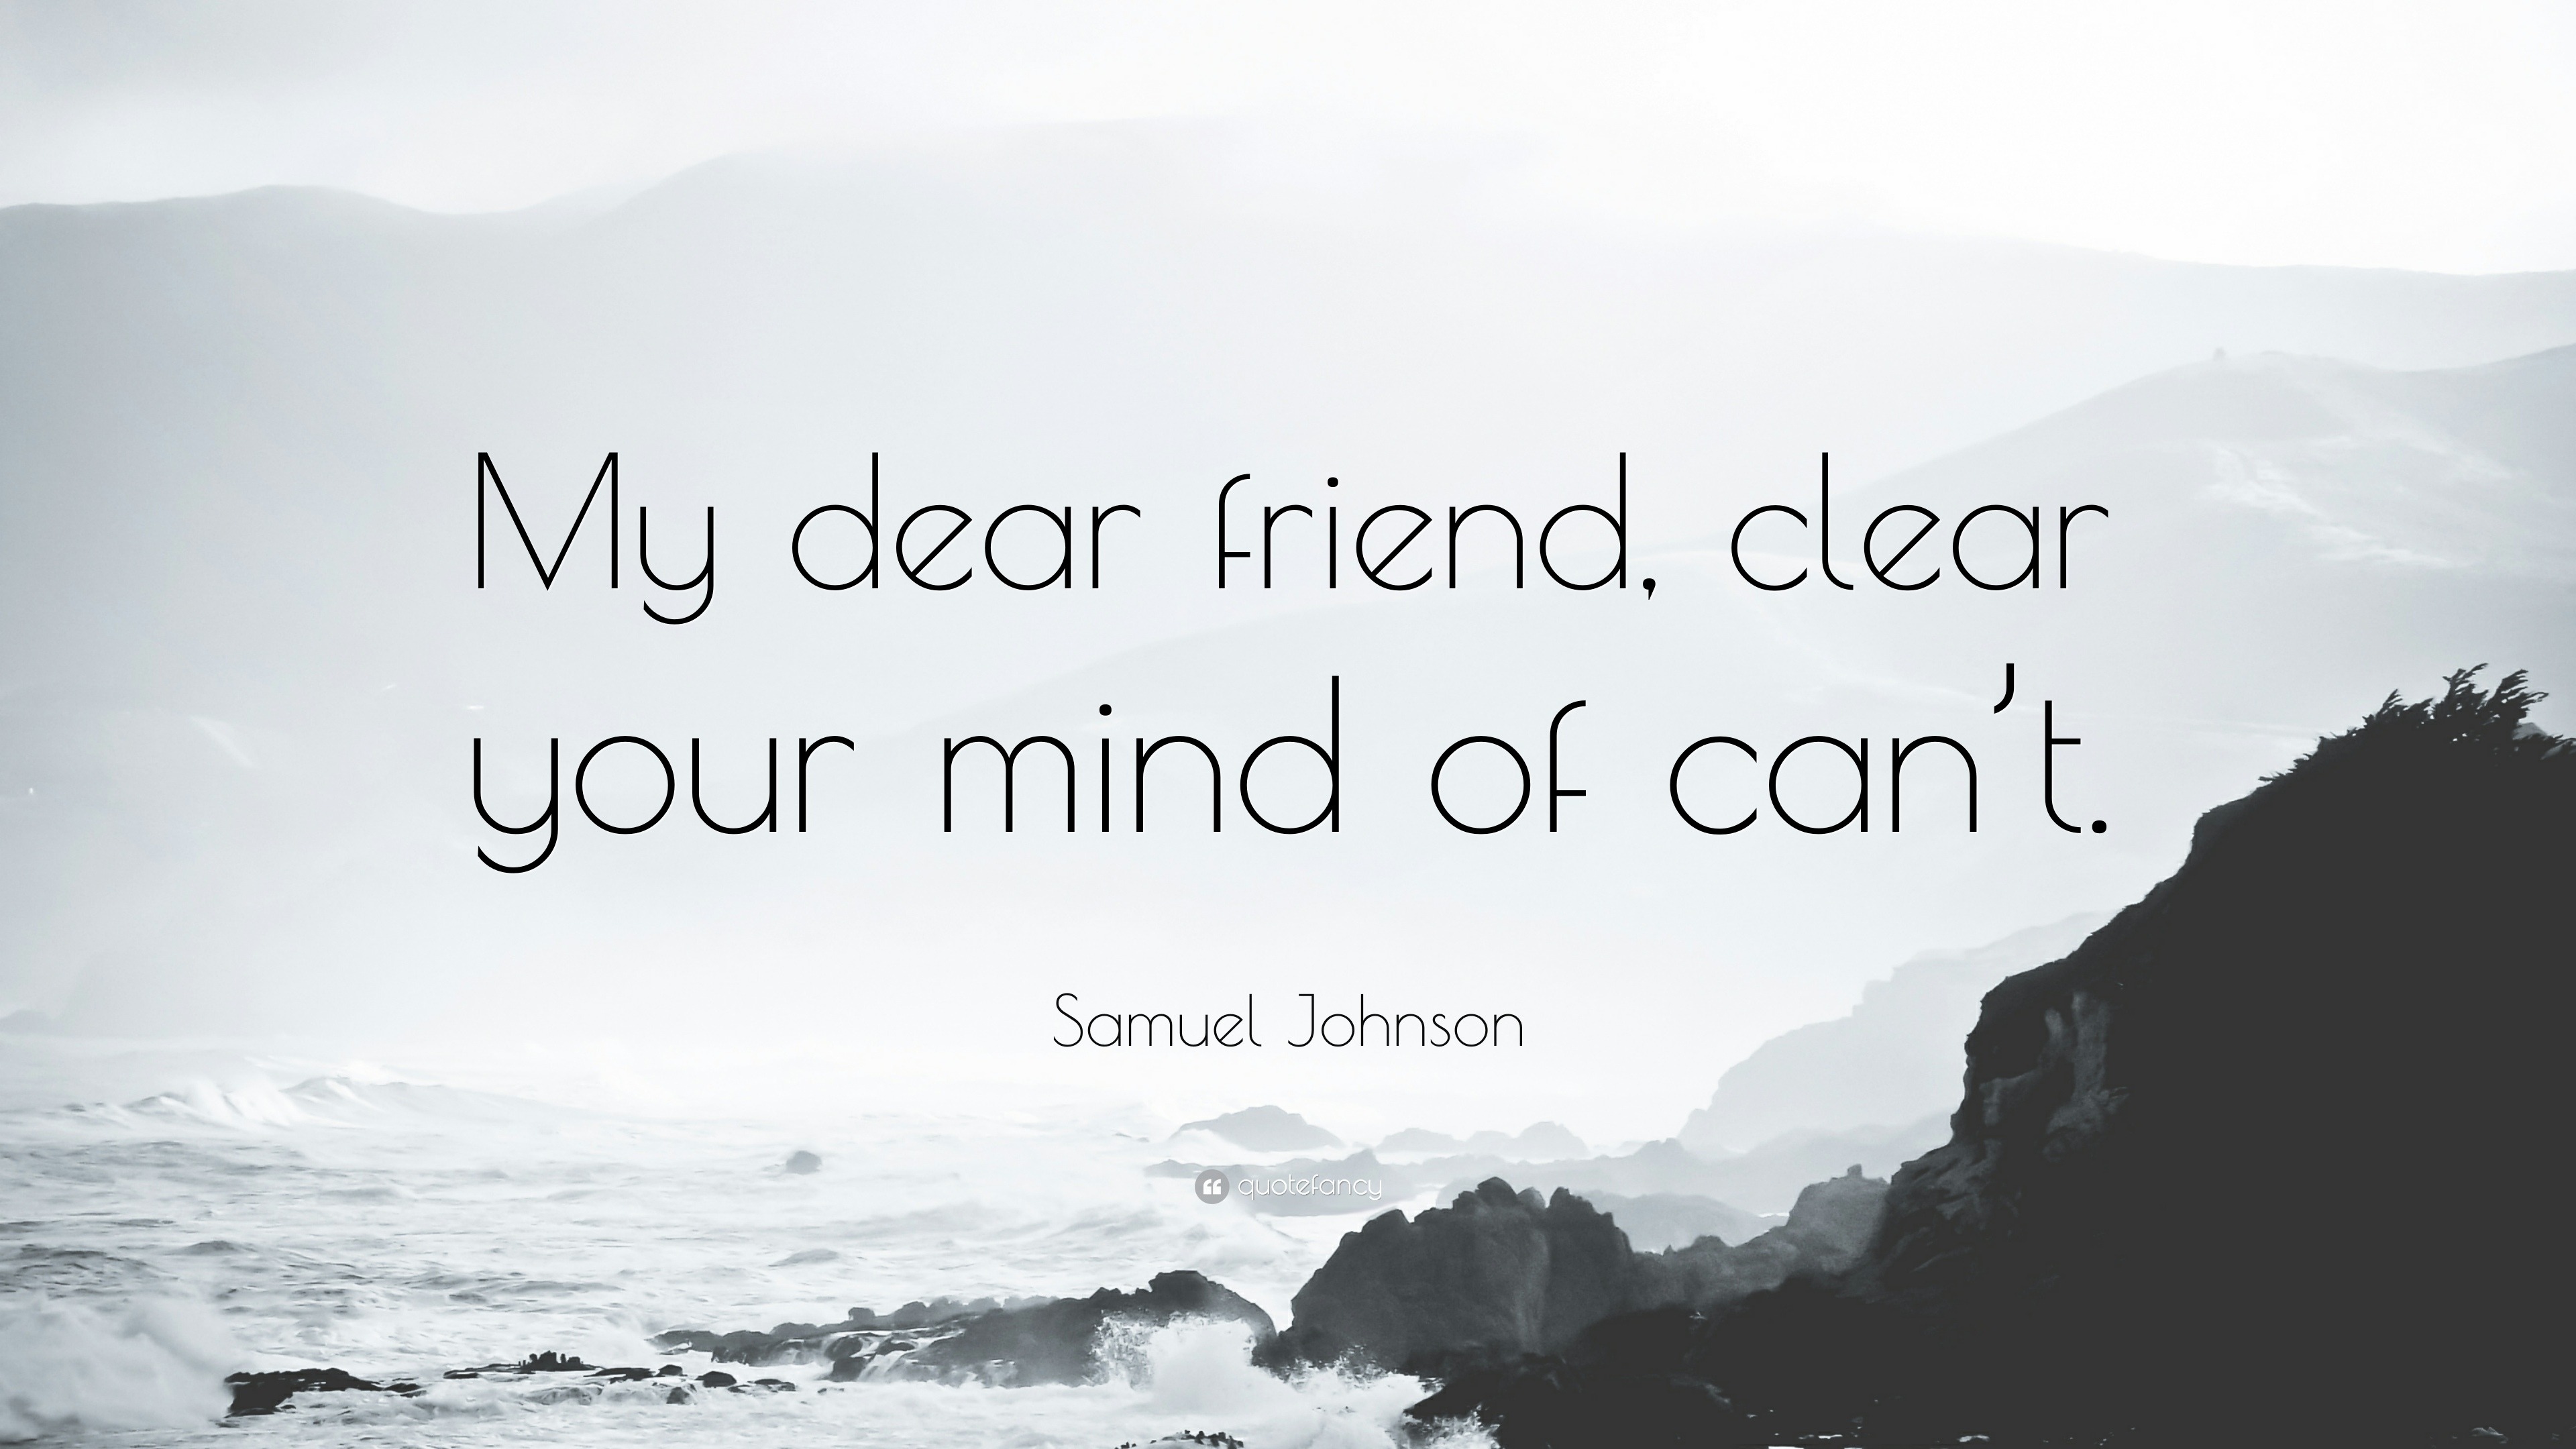 Samuel Johnson Quote: “My dear friend, clear your mind of can't.”